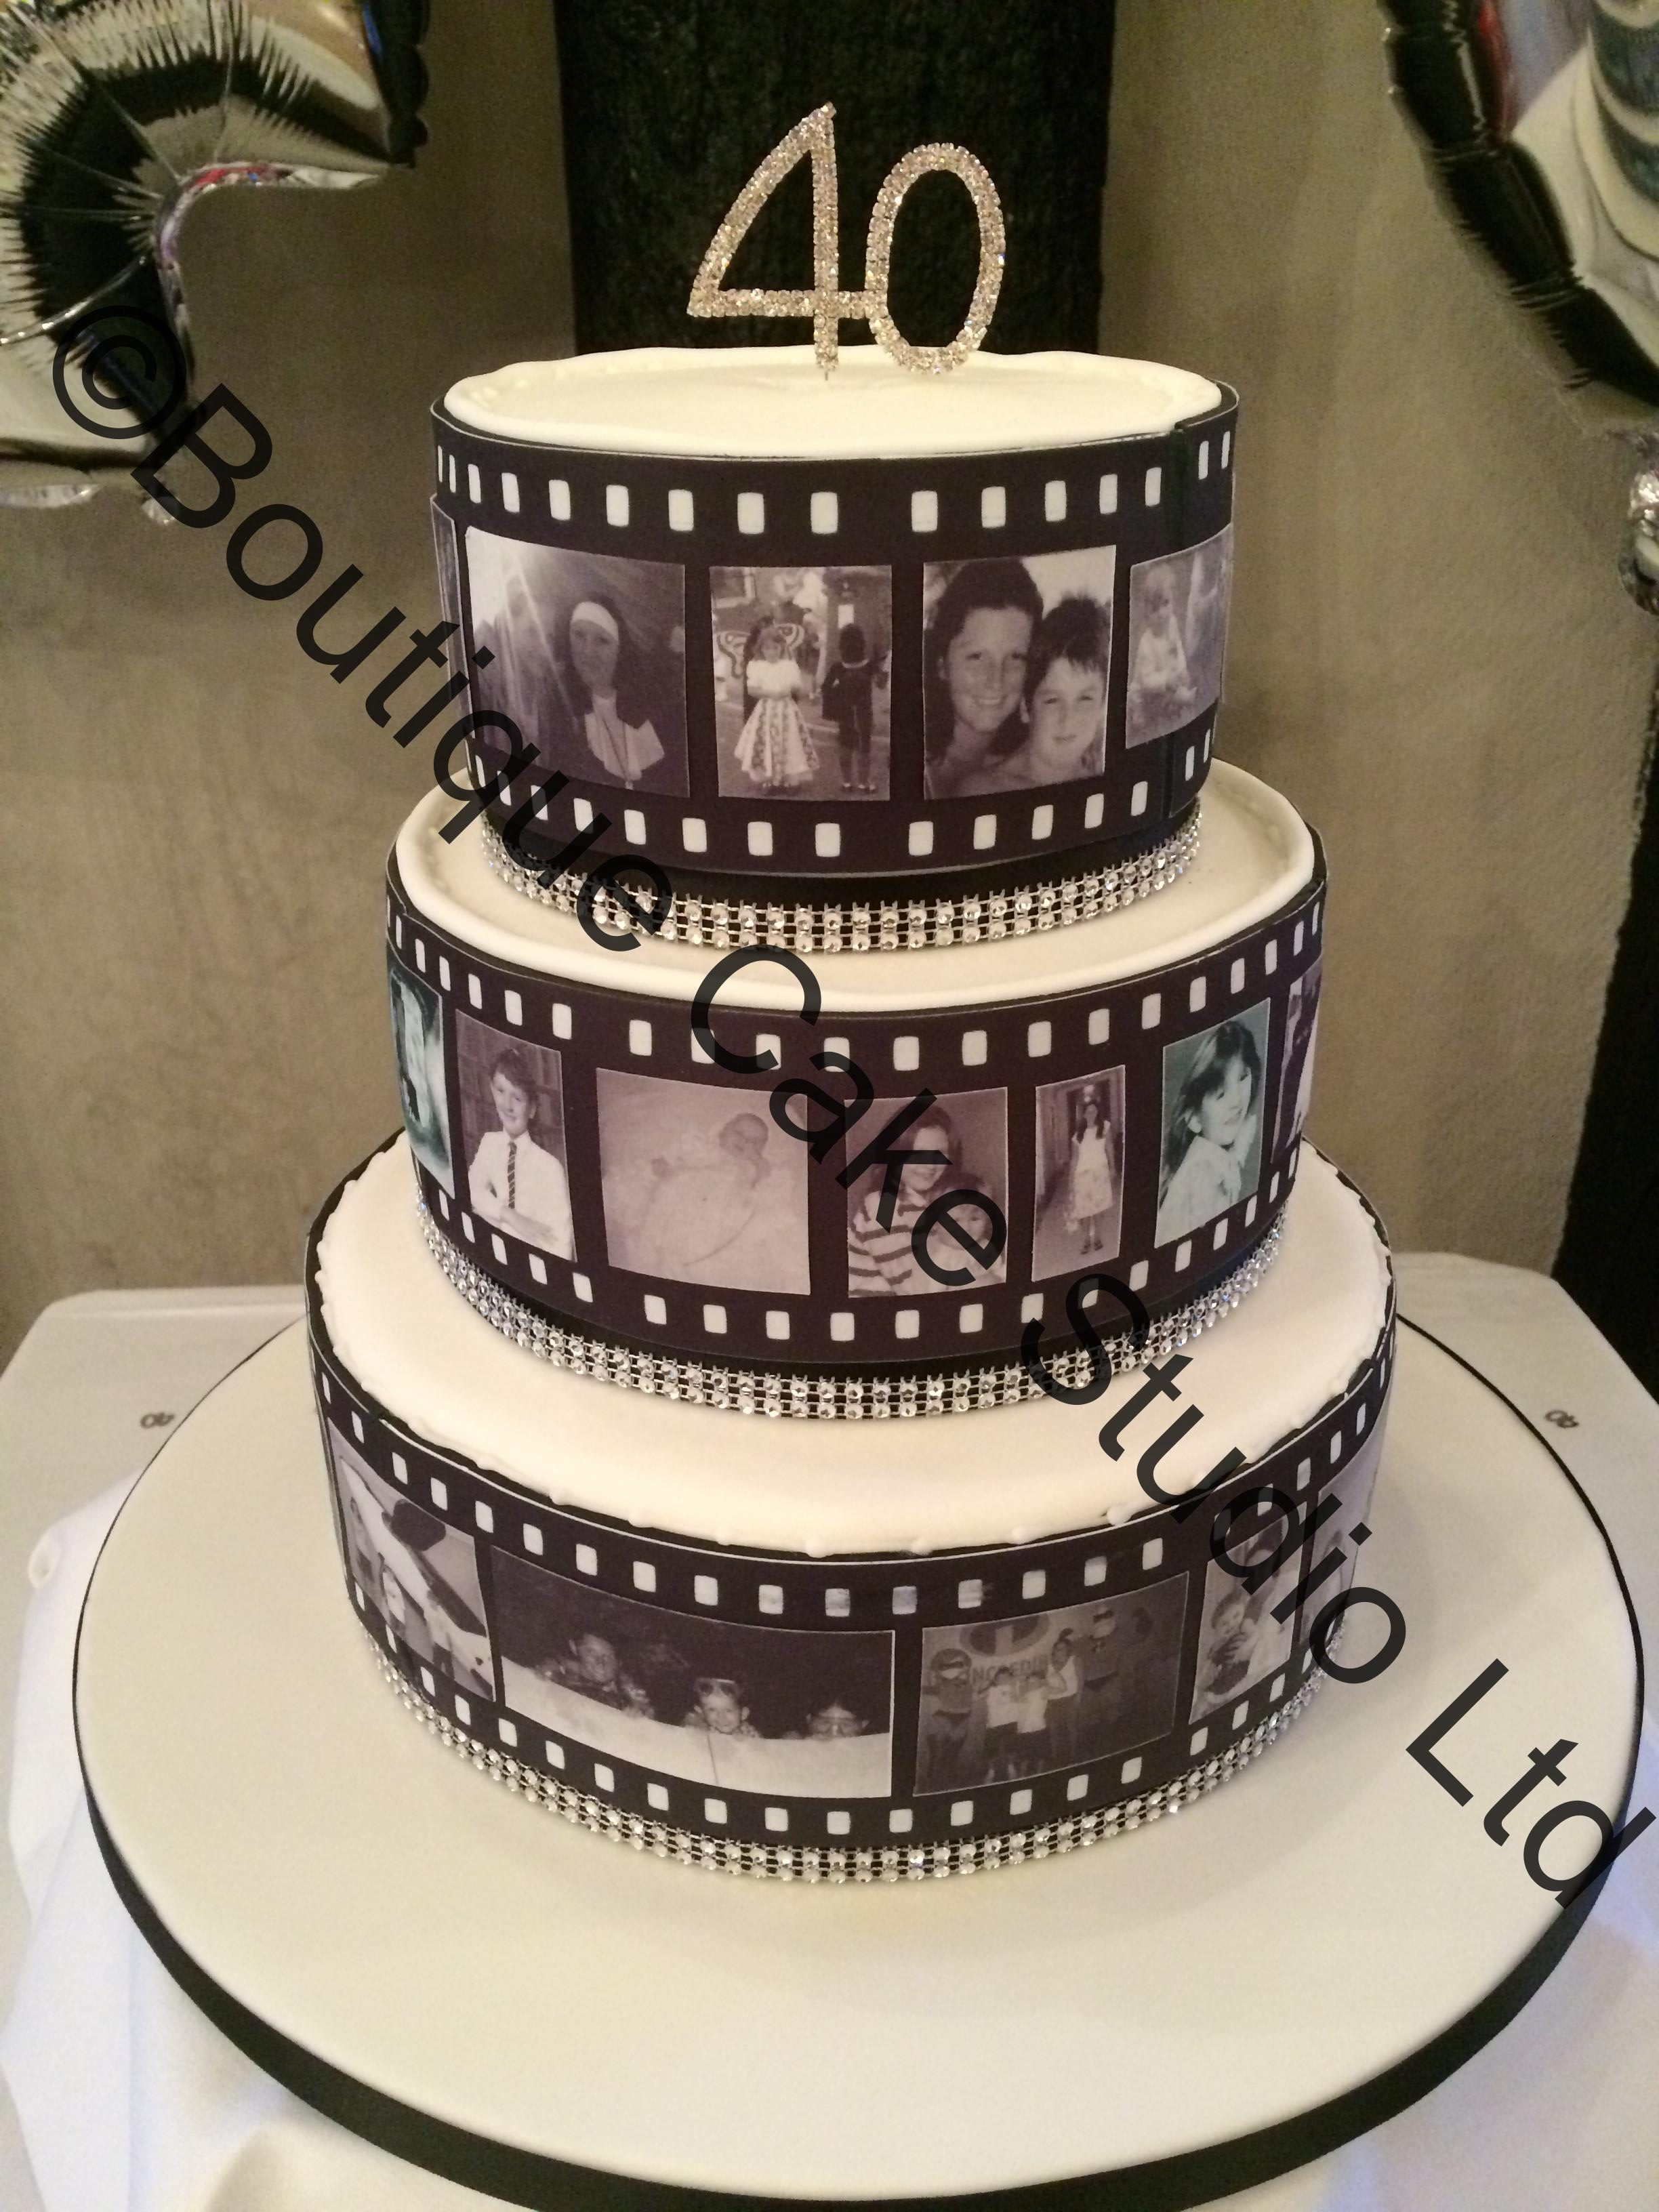 Straight photo reel stacked cake